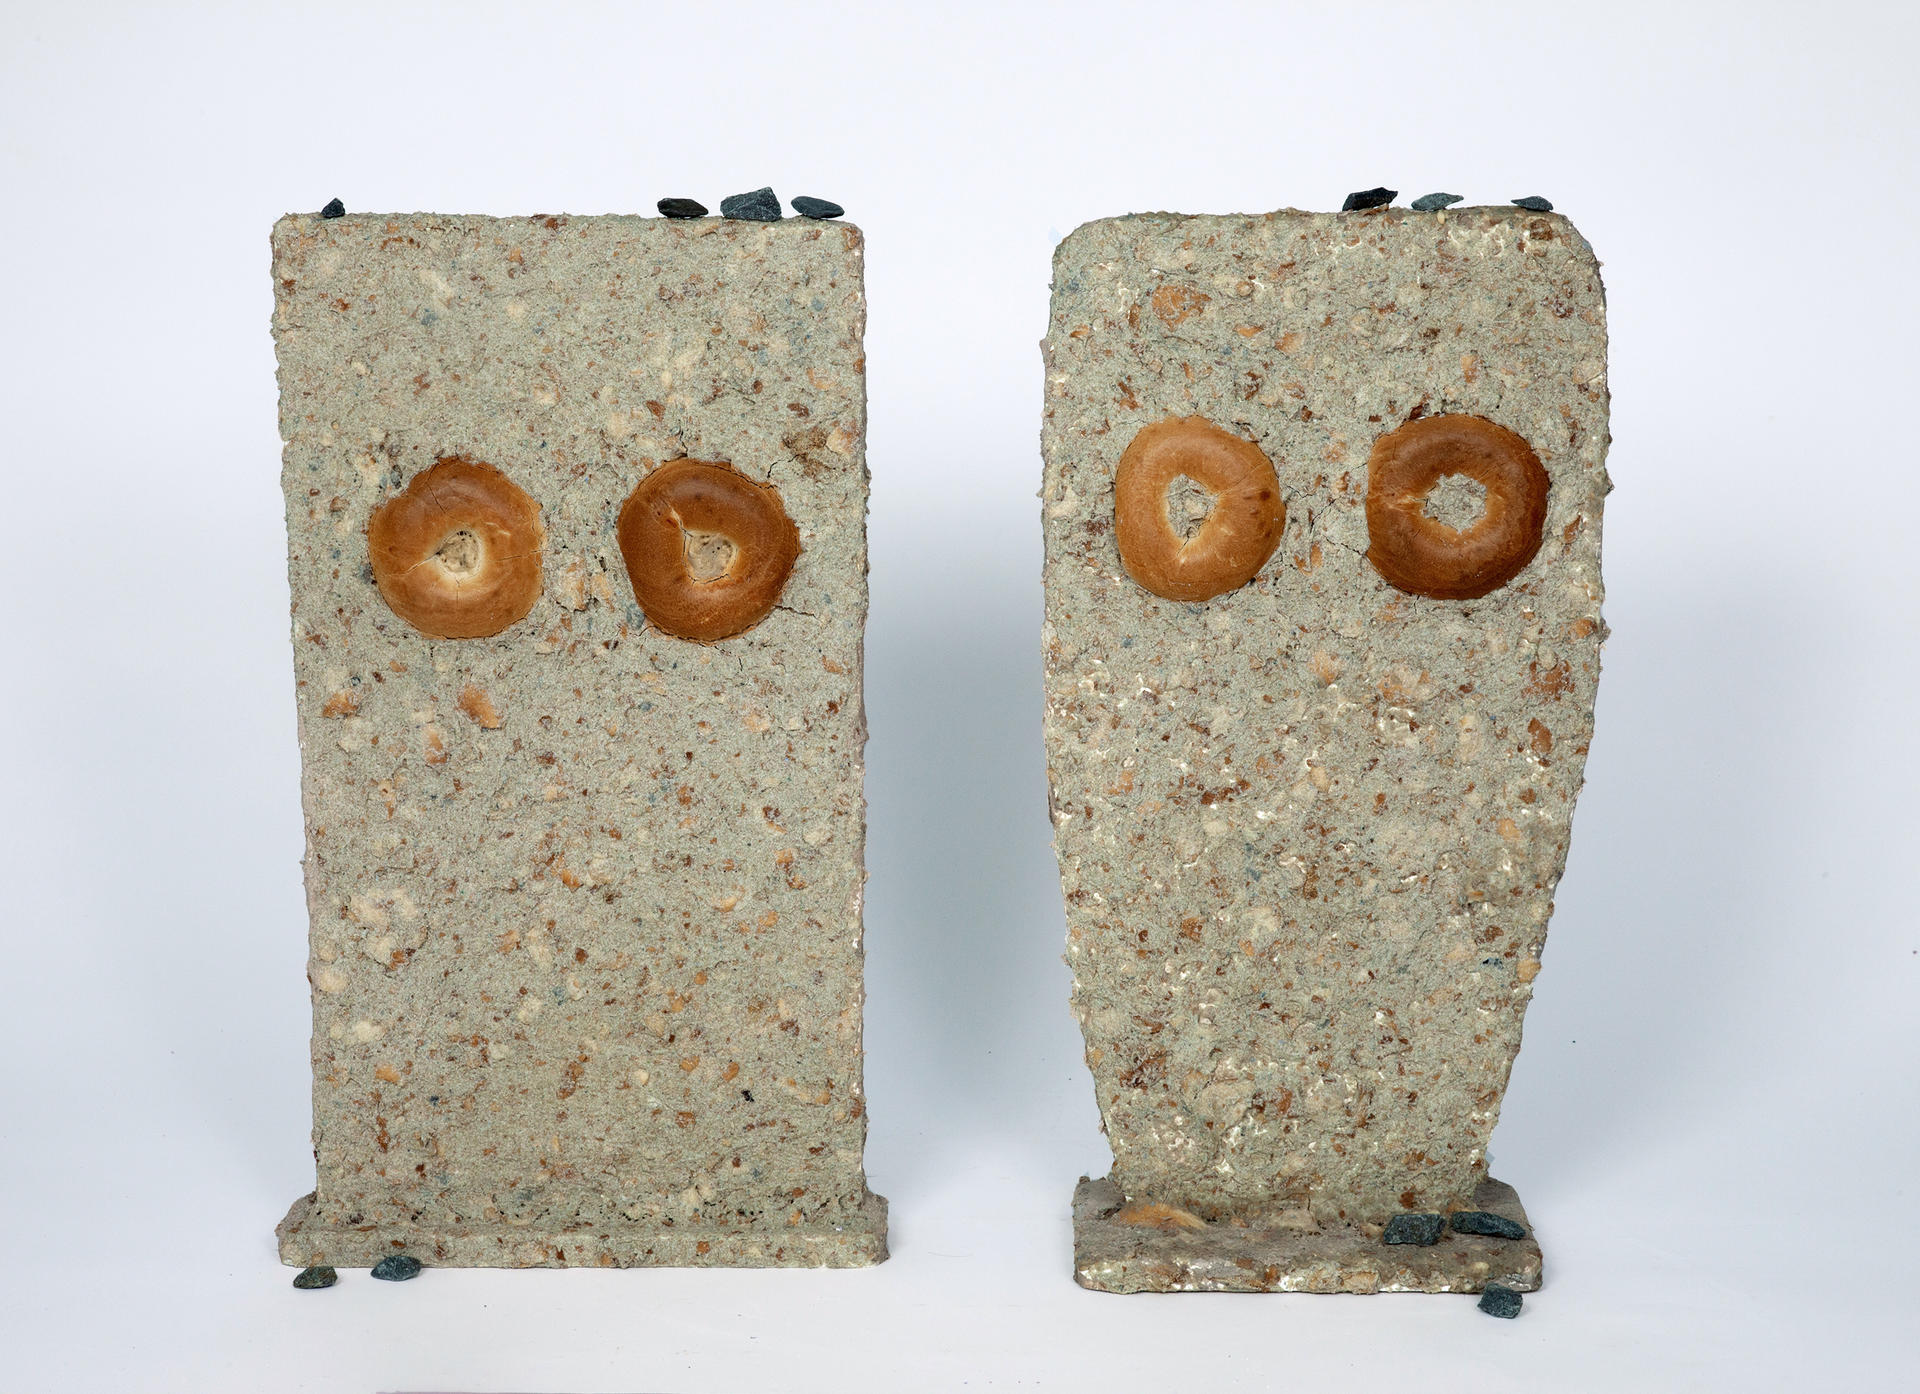 Two Tombstones made of bagels